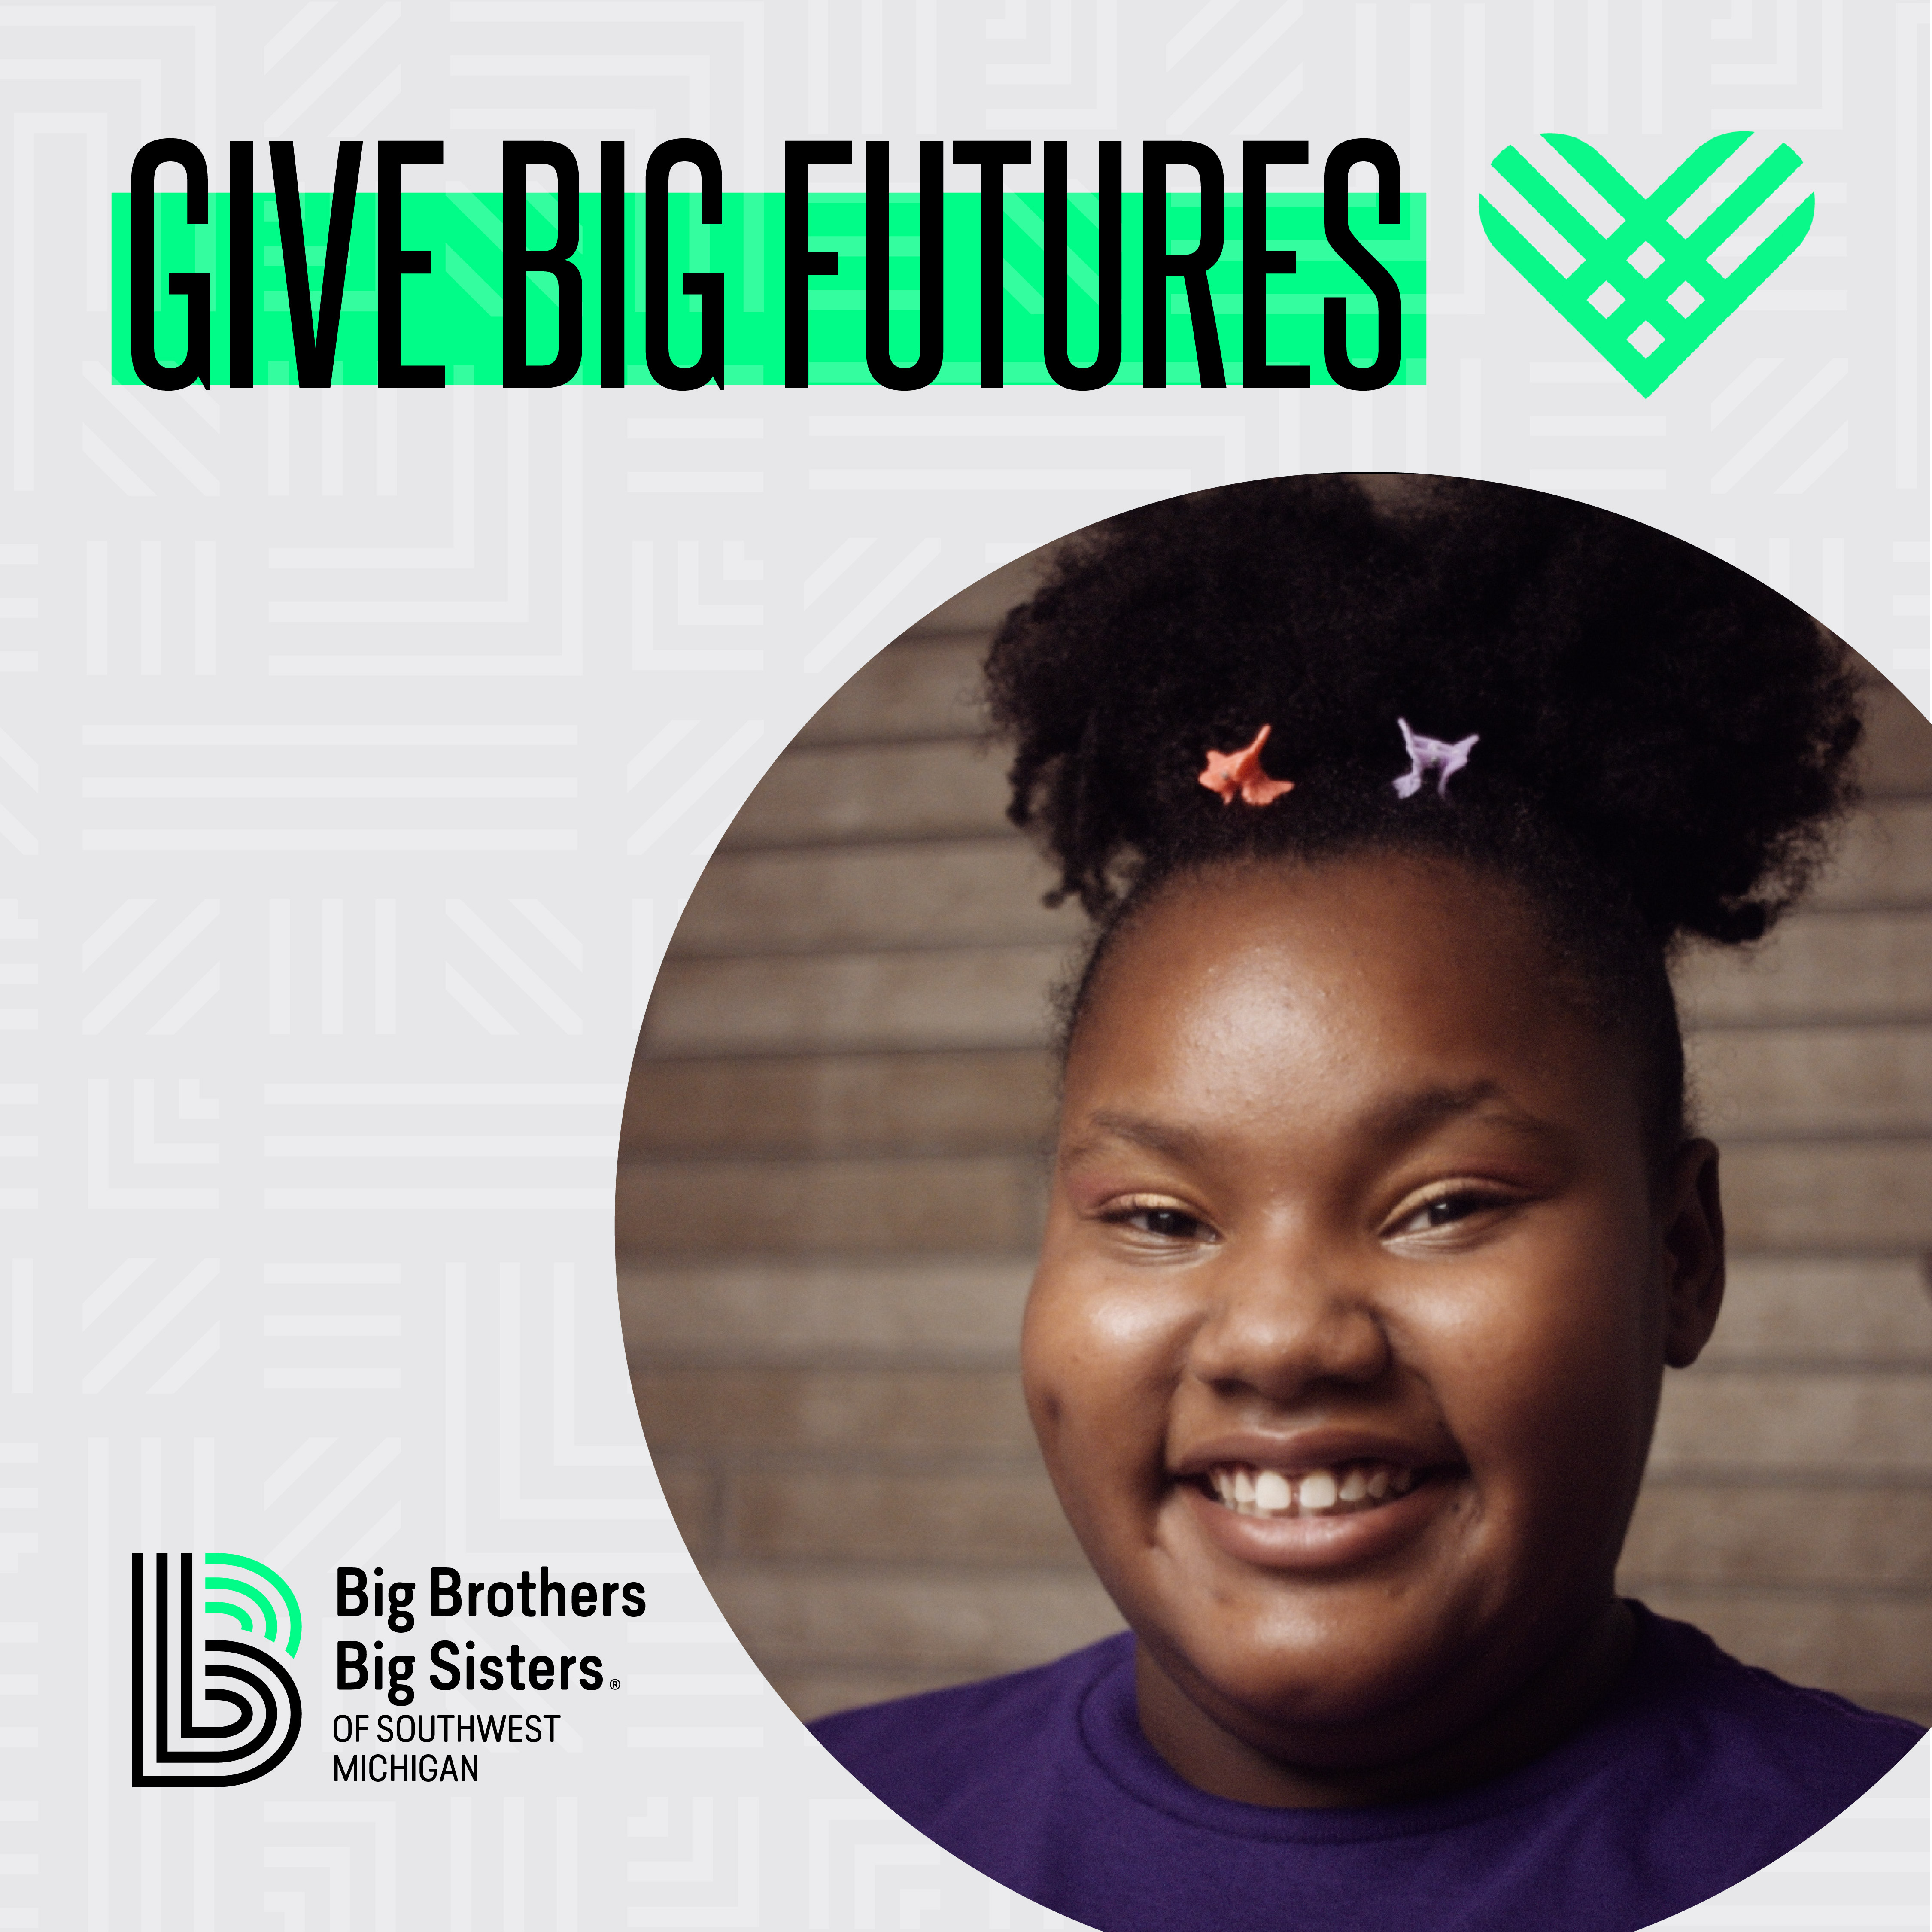 Text reading "Give Big Futures" above a photo of Jaliyah smiling. BBBS logo on the lower left.